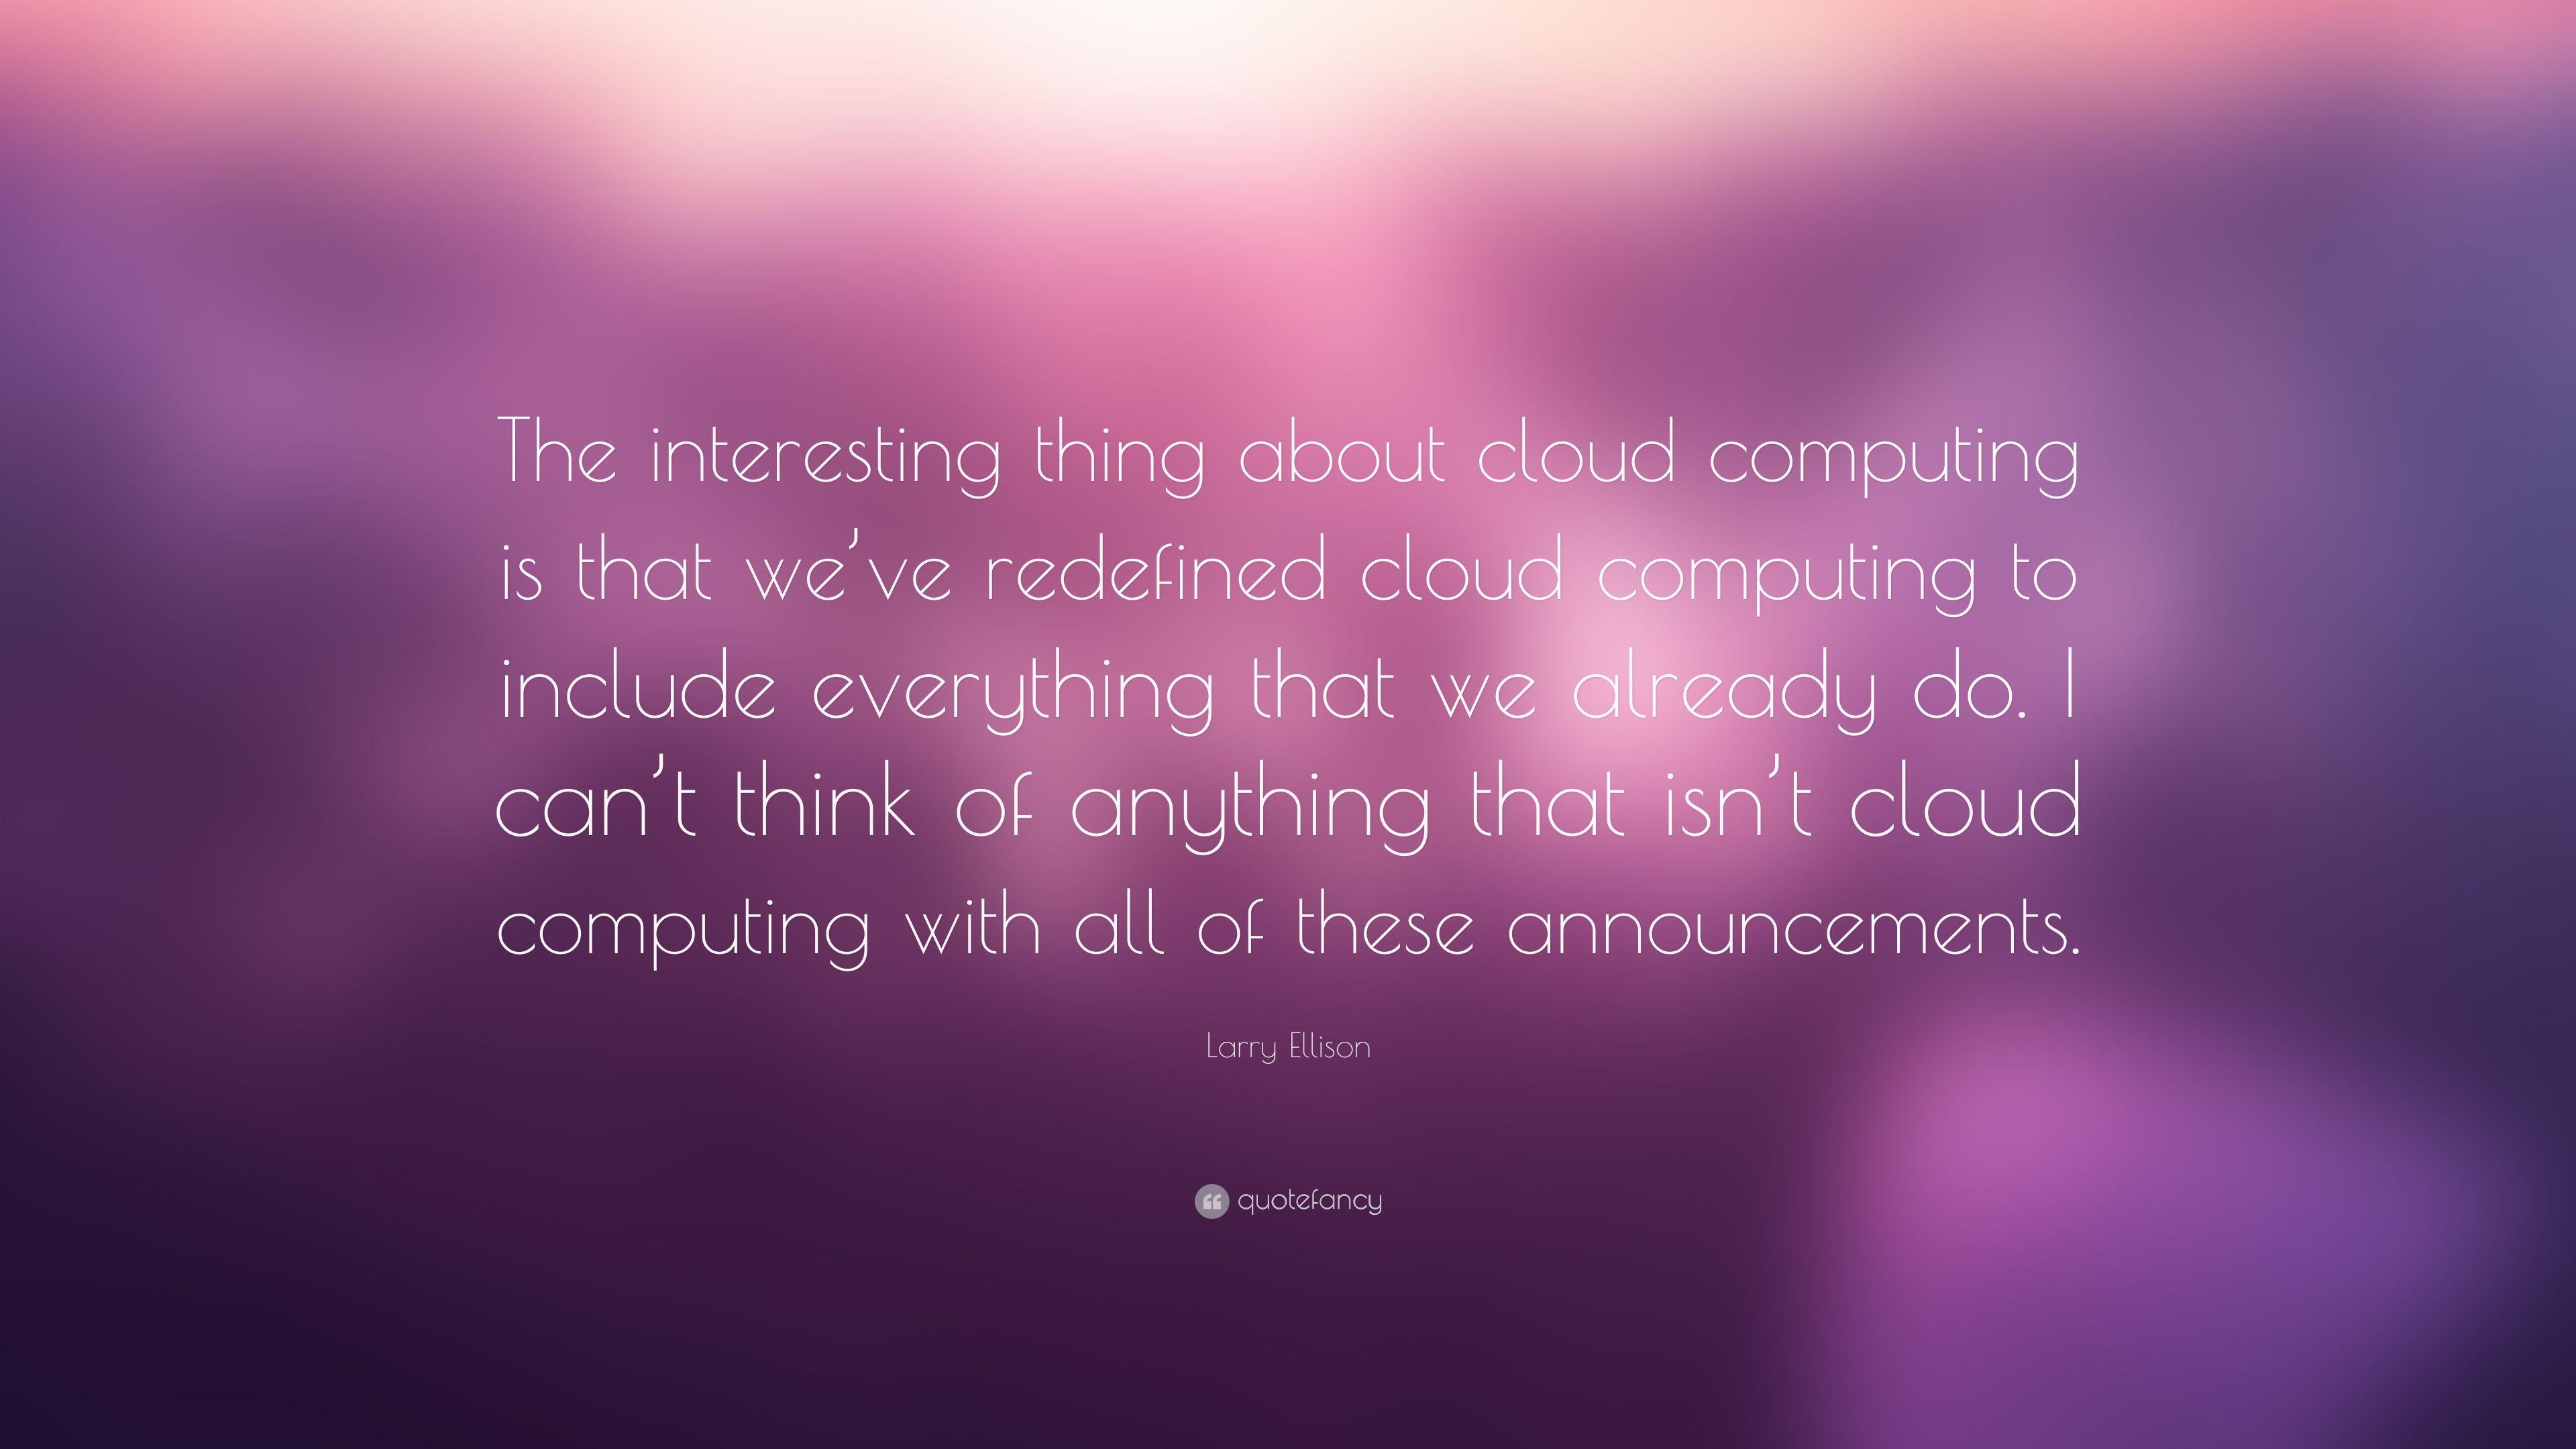 Larry Ellison Quote: “The interesting thing about cloud computing is